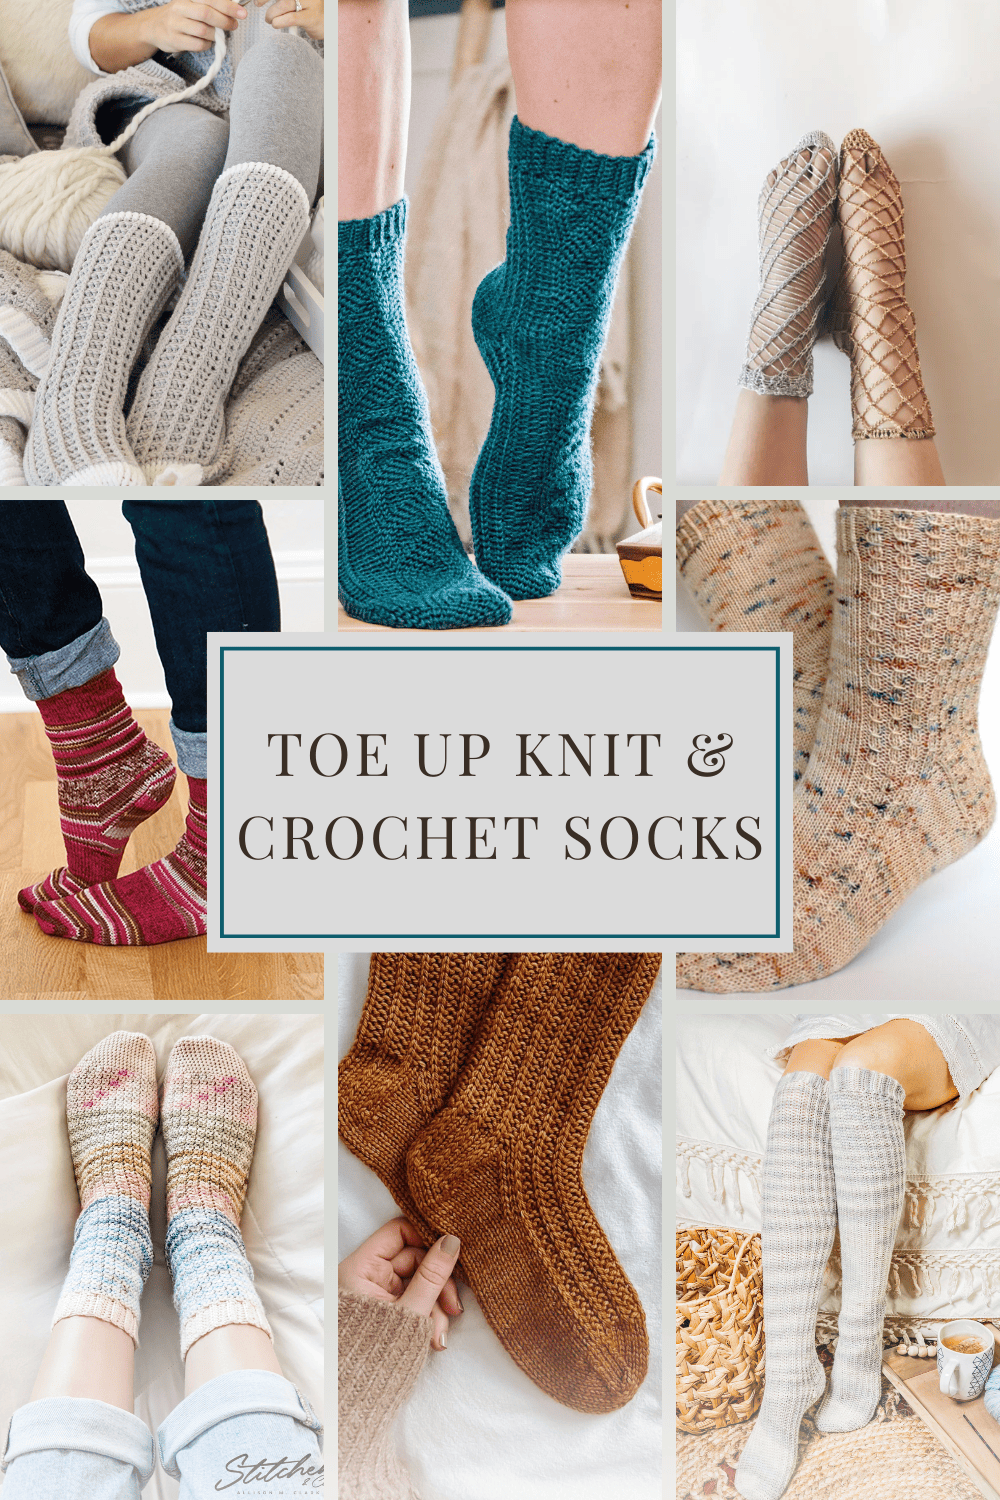 Conquer Toe Up Crochet & Knit Socks With These Terrific Patterns